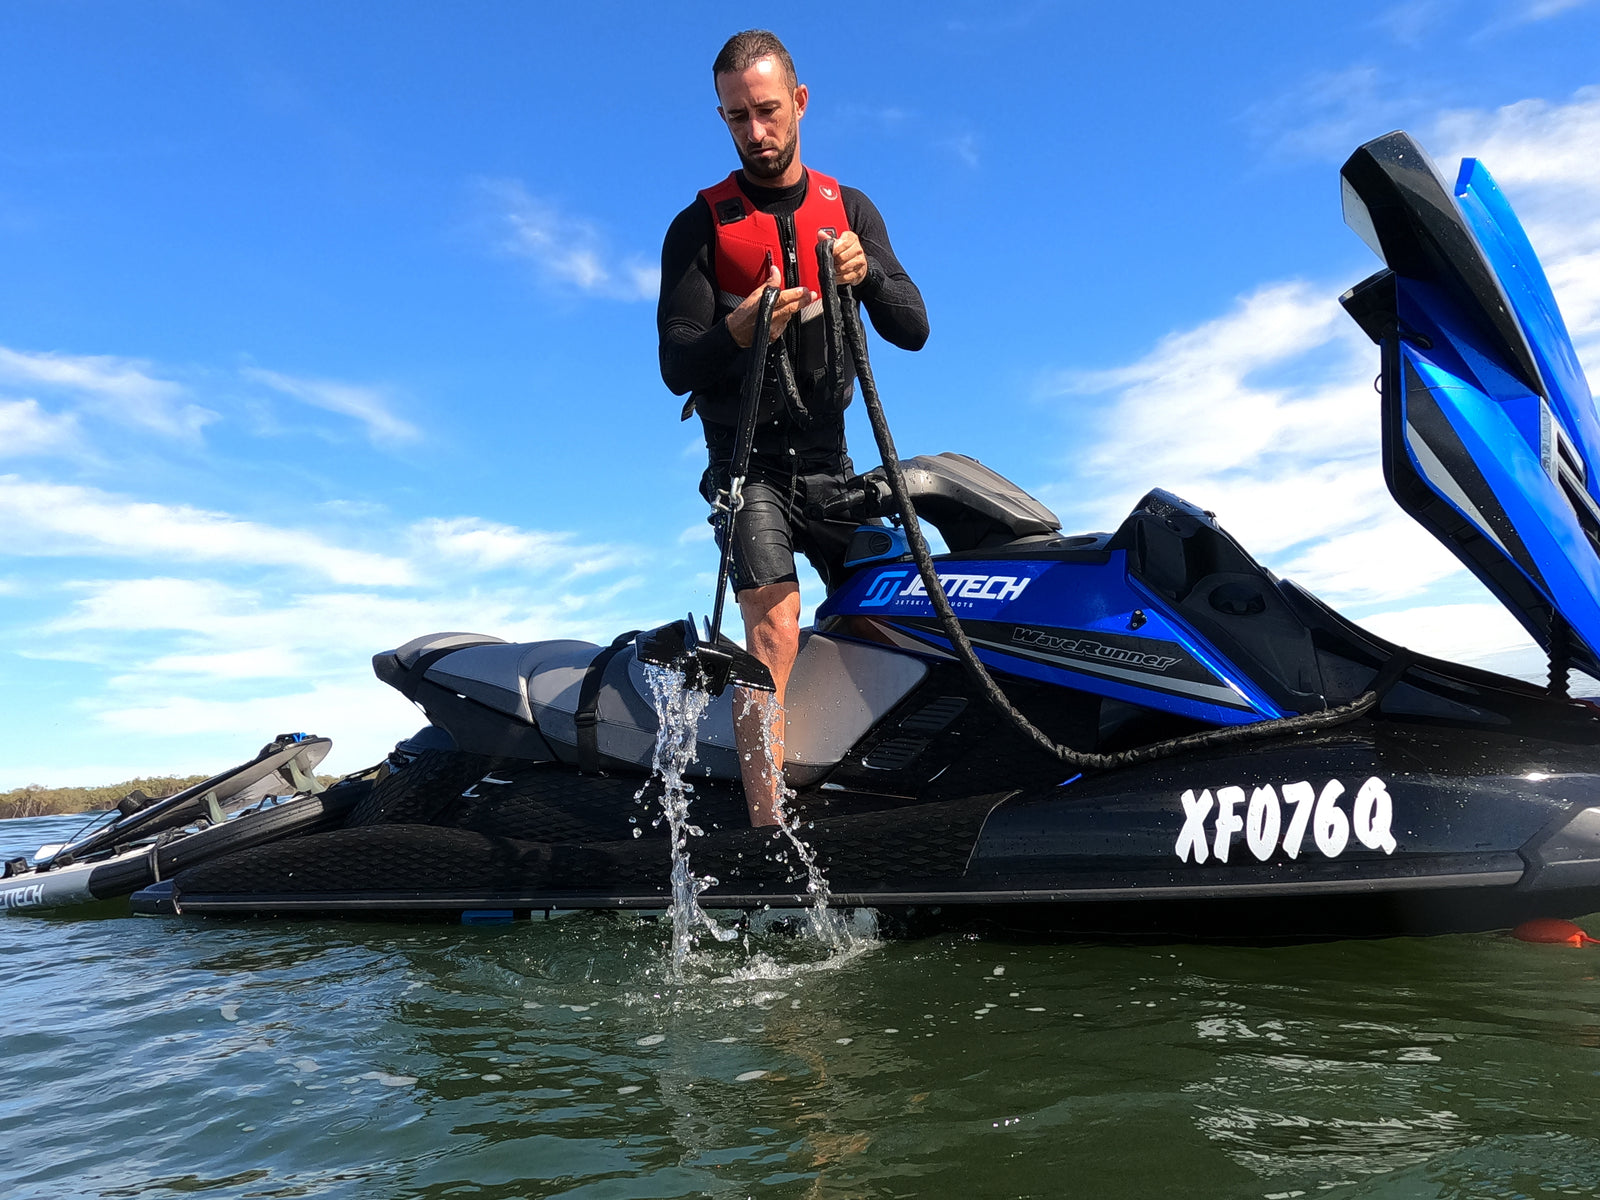 How to anchor a jet ski